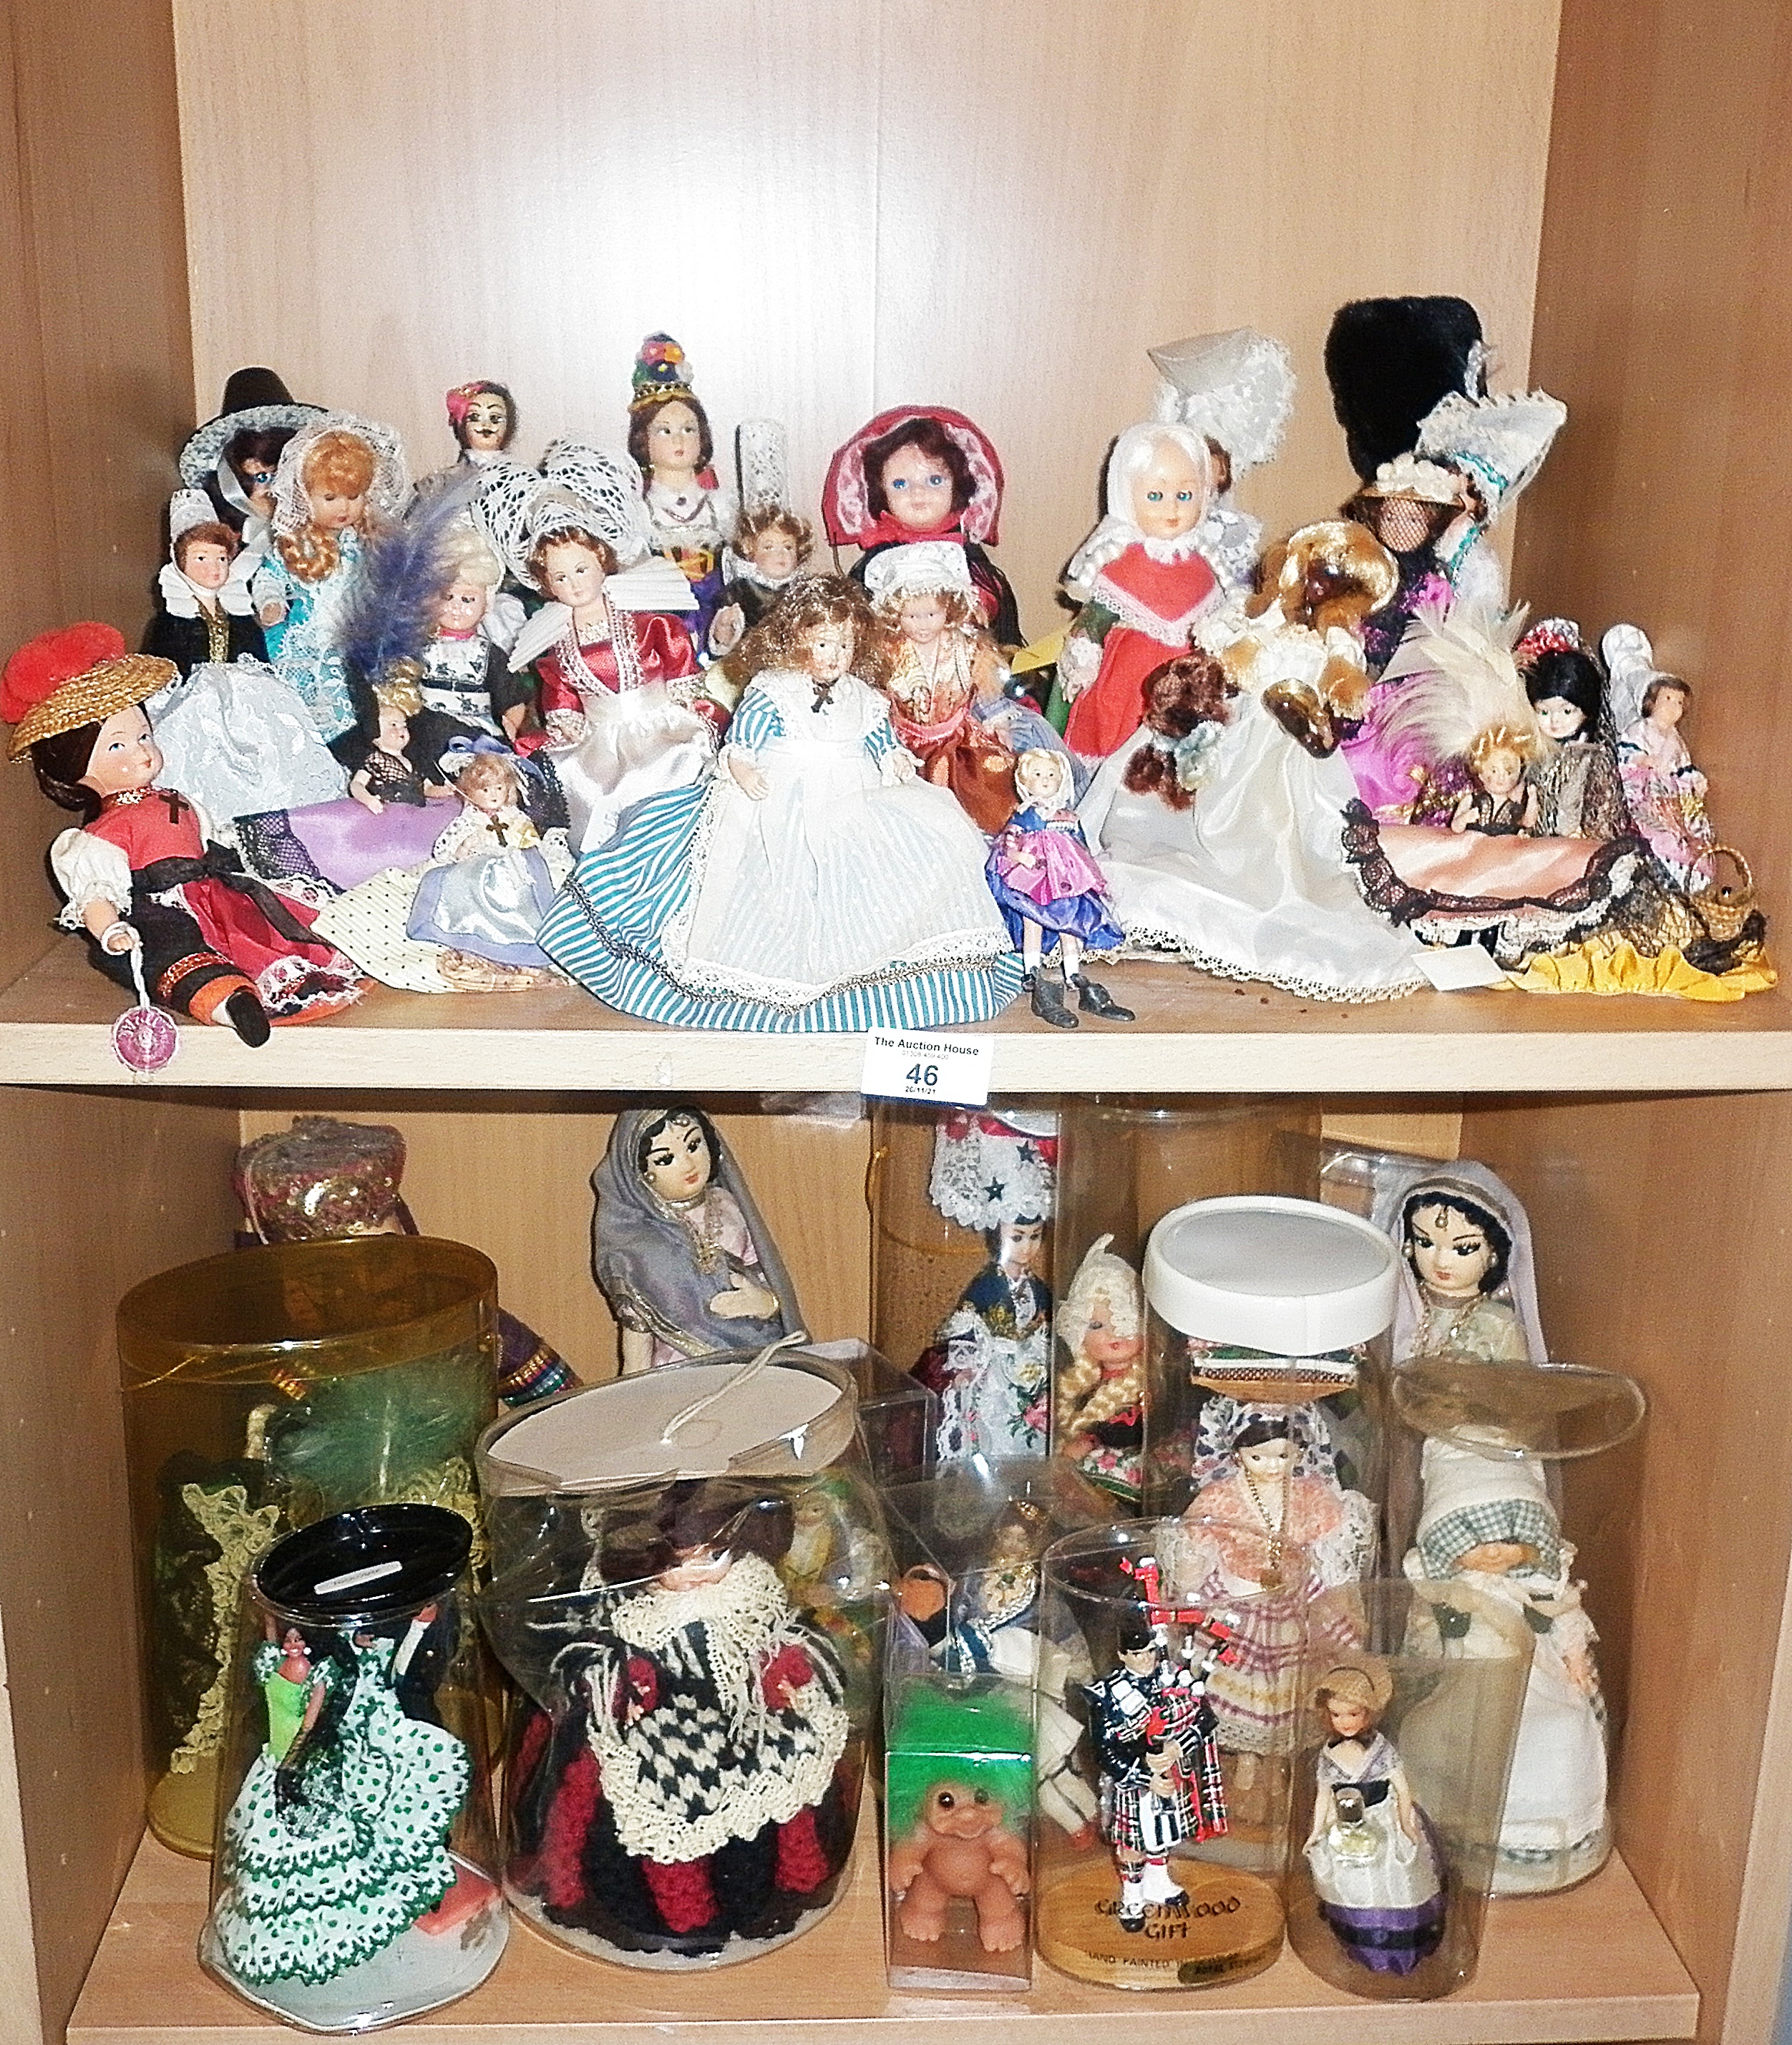 Collection on two shelves of dolls in national costumes